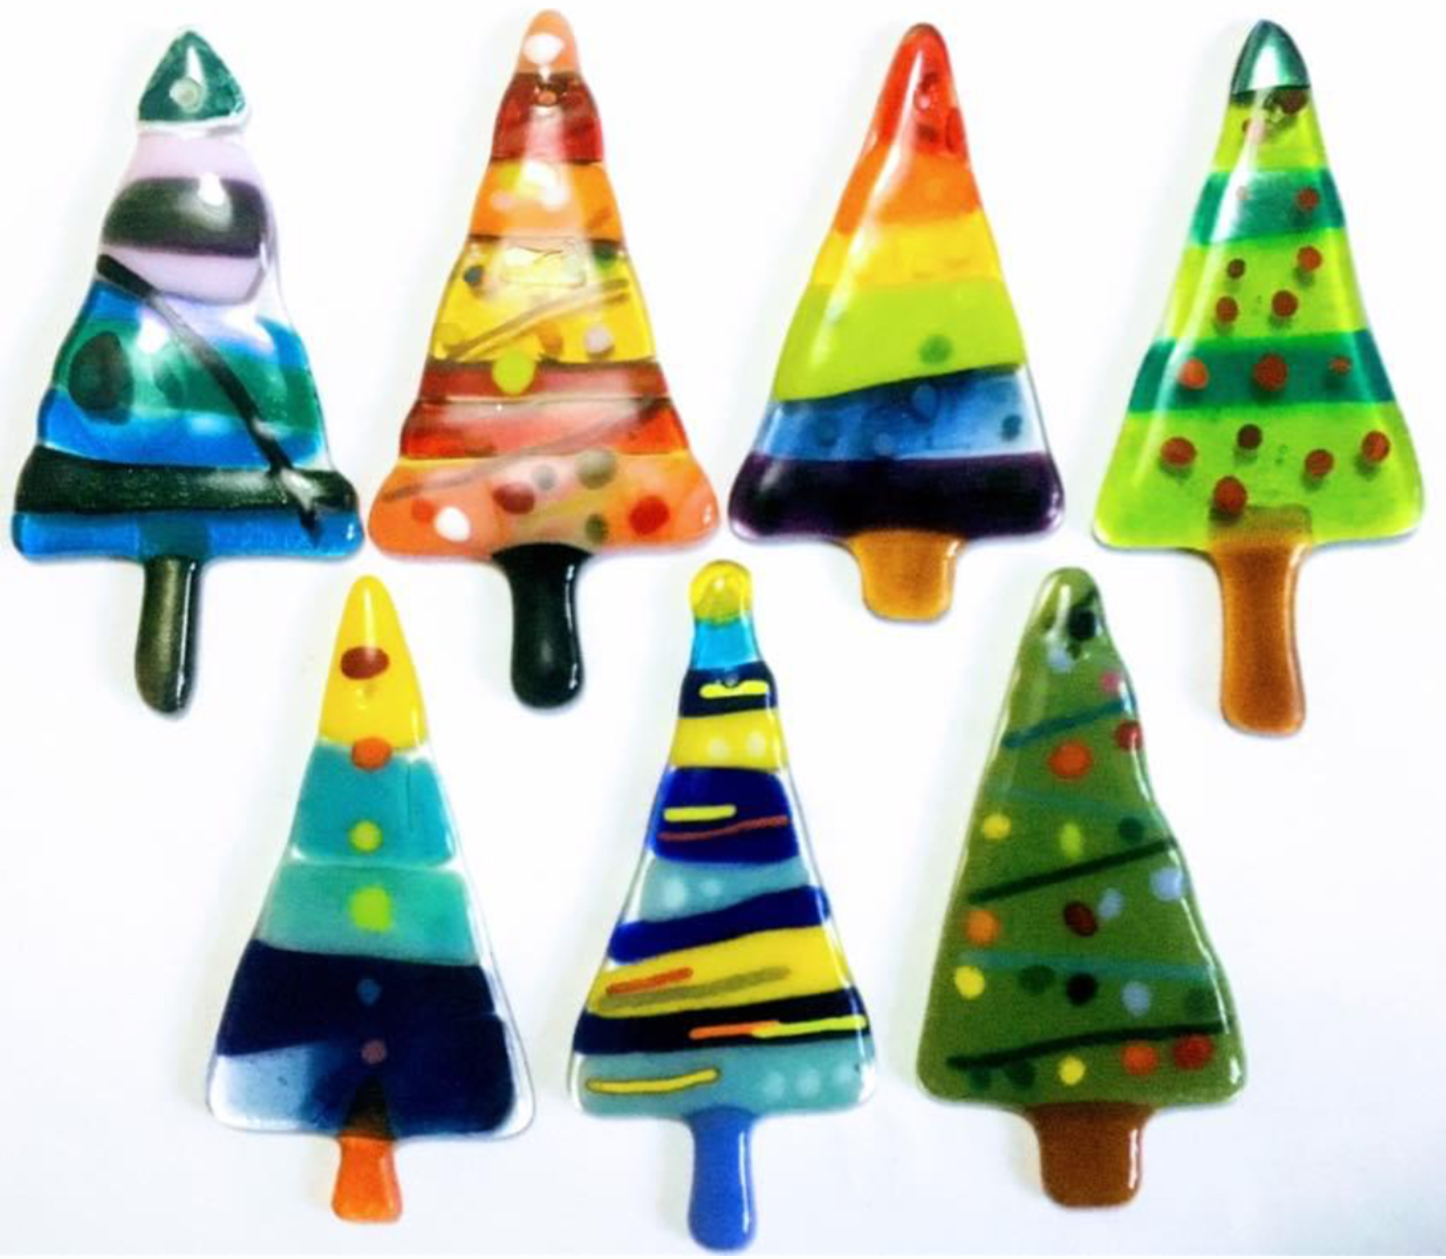 Festive Hanging Trees - SOLD OUT